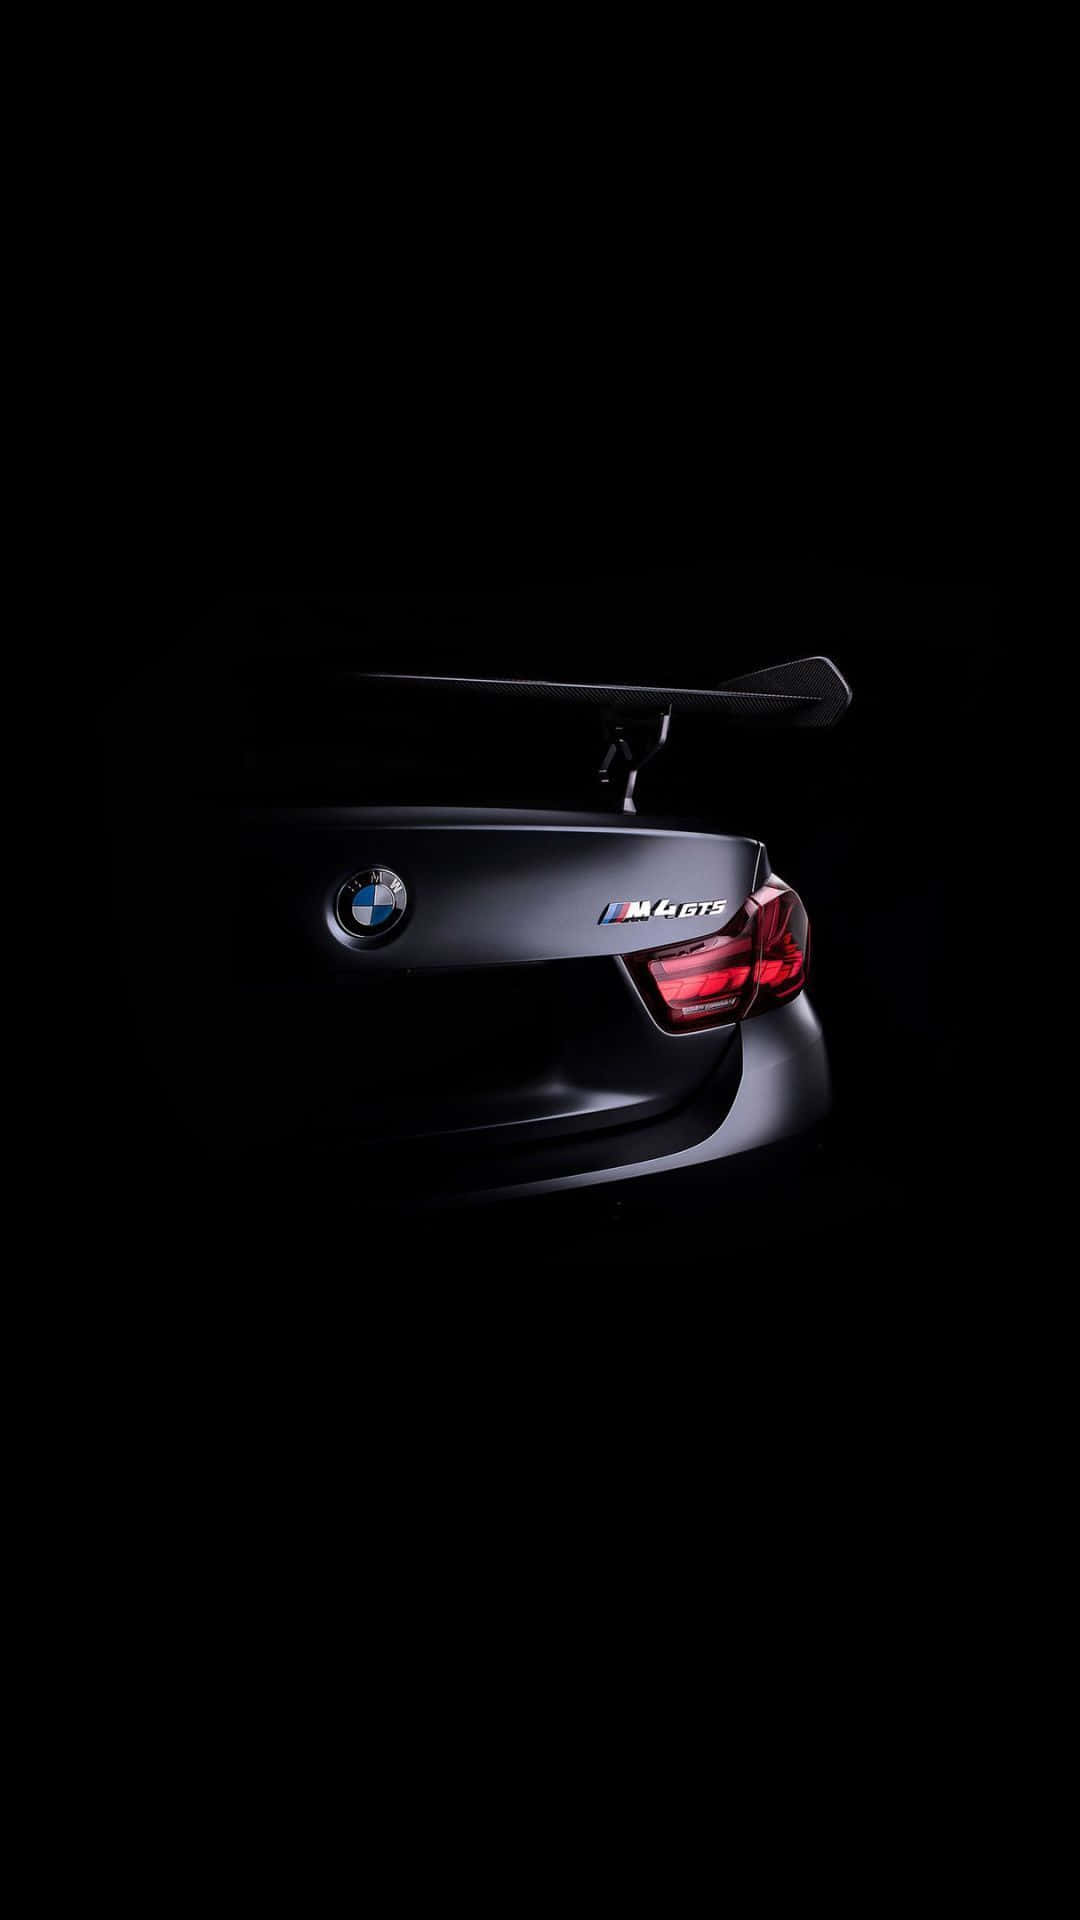 Driving the BMW- Android experience Wallpaper